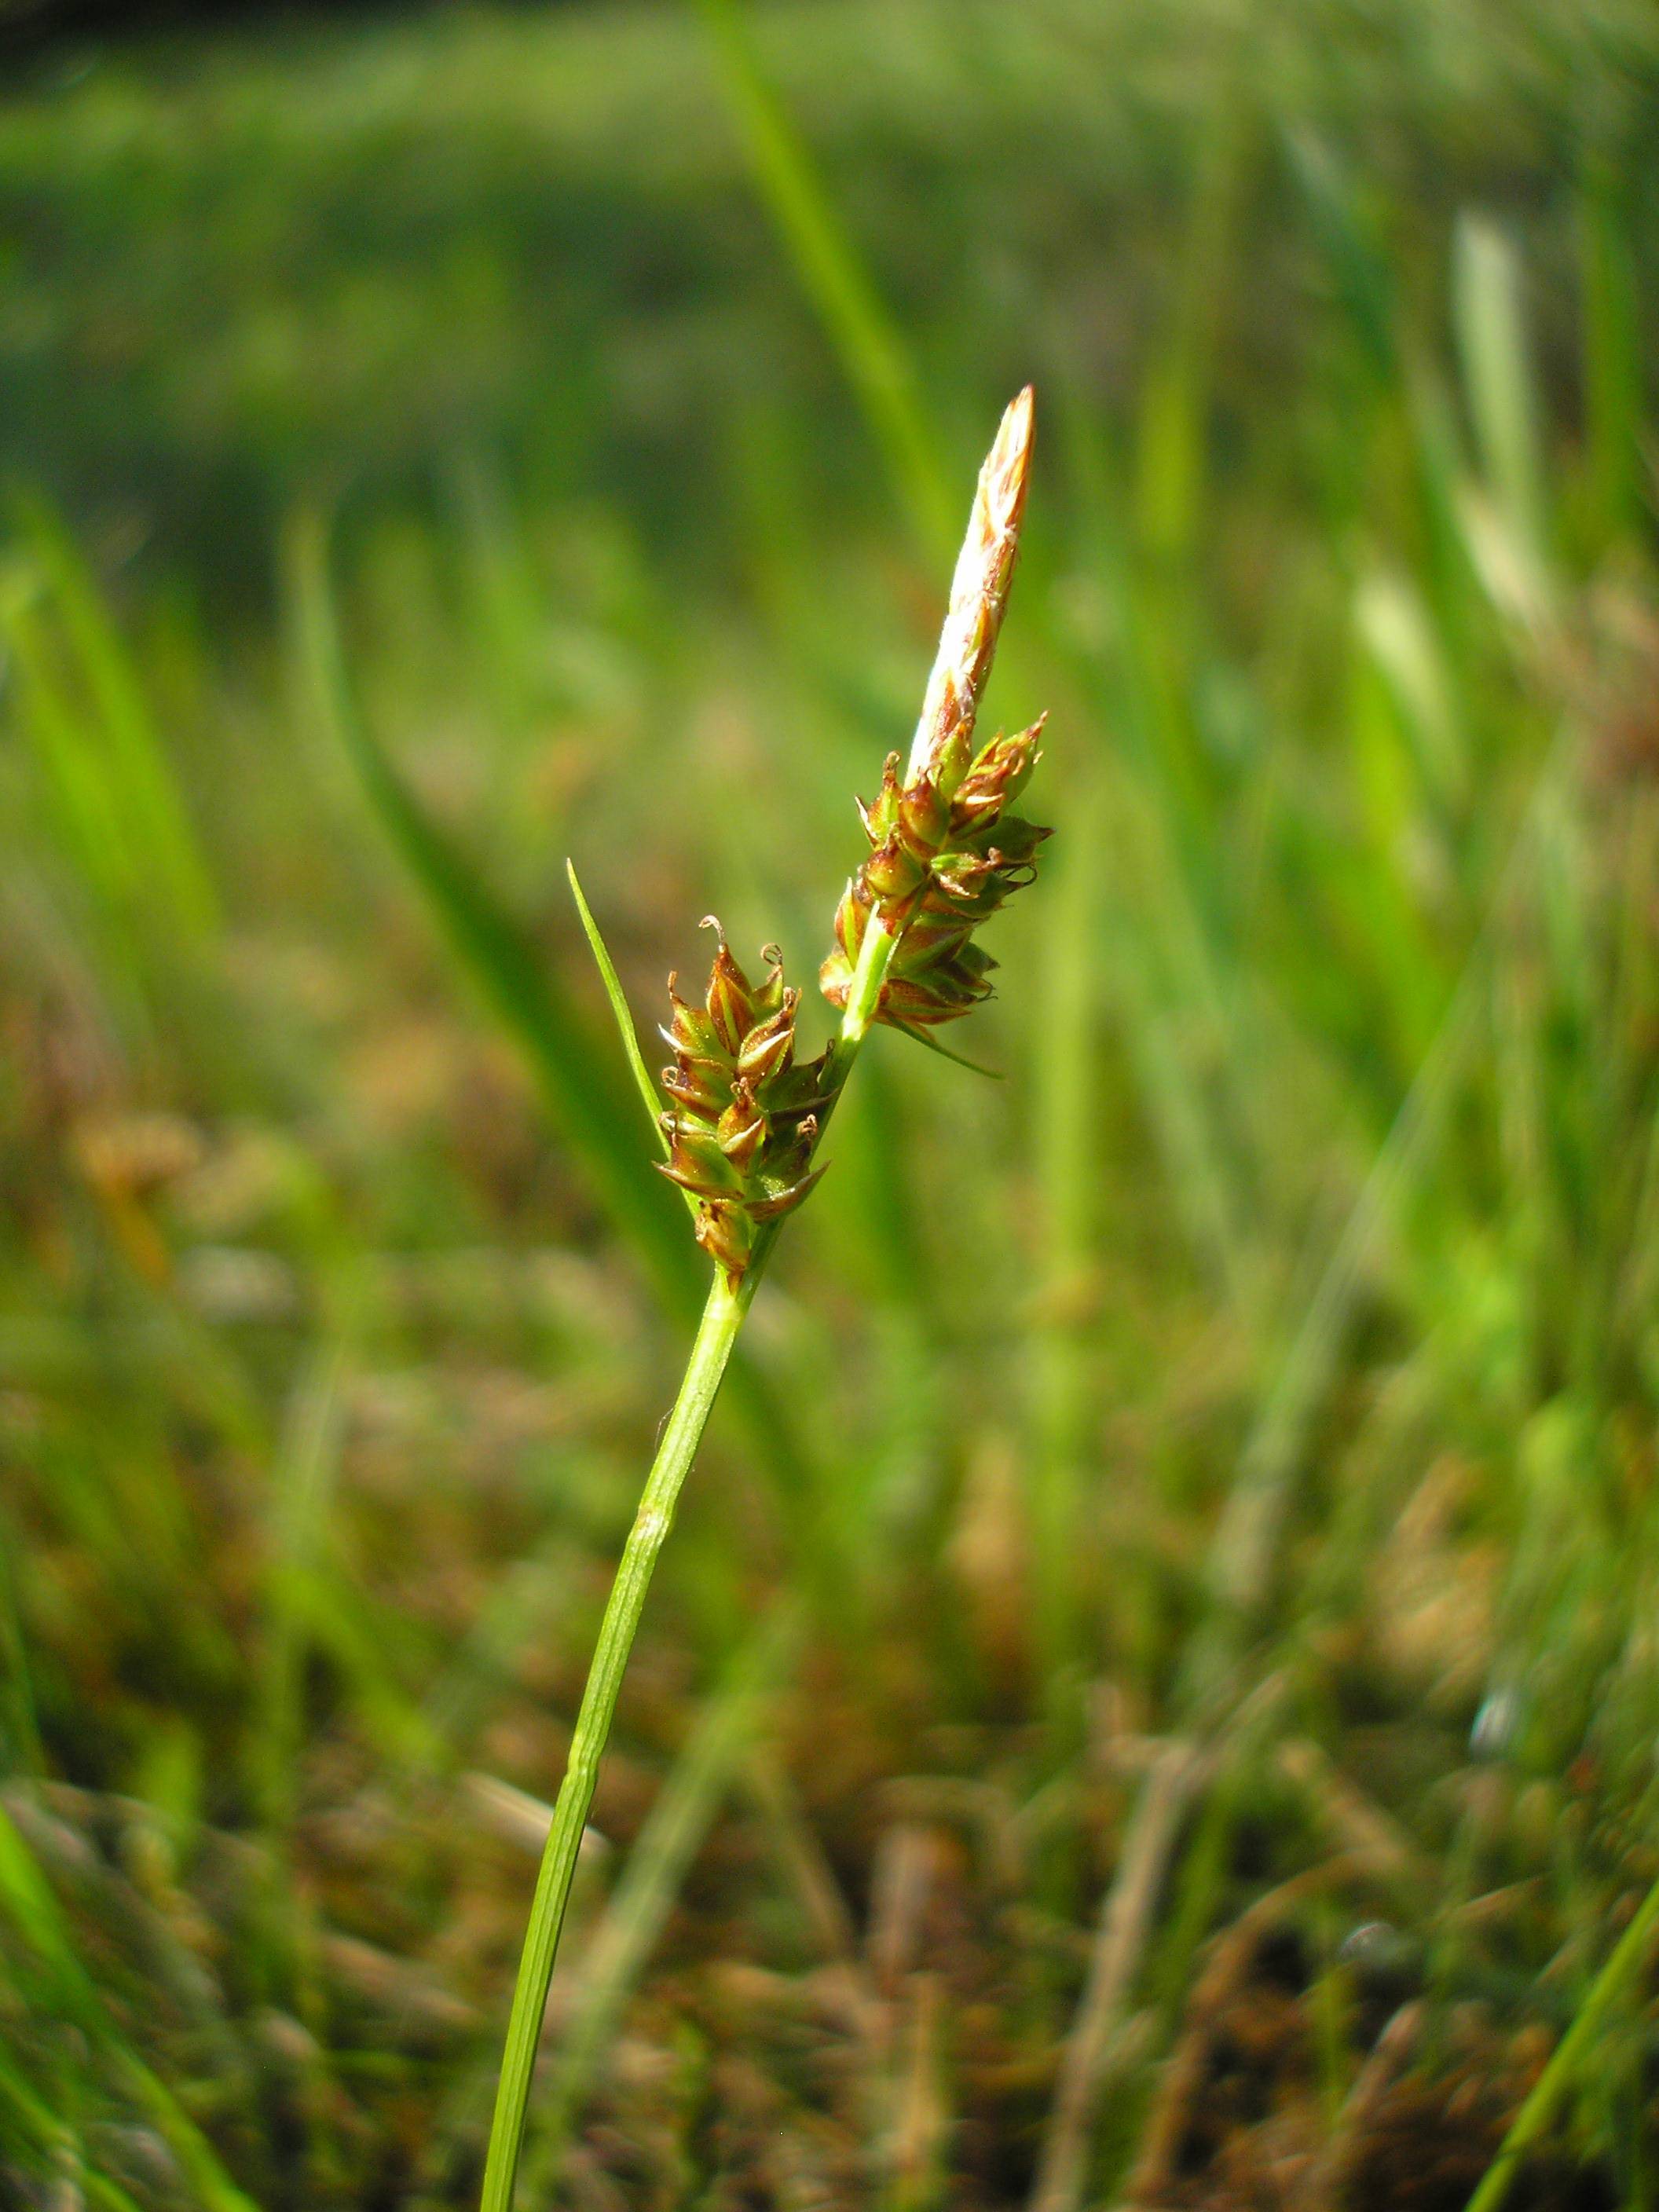 lime-brown spikelets with lime foliage